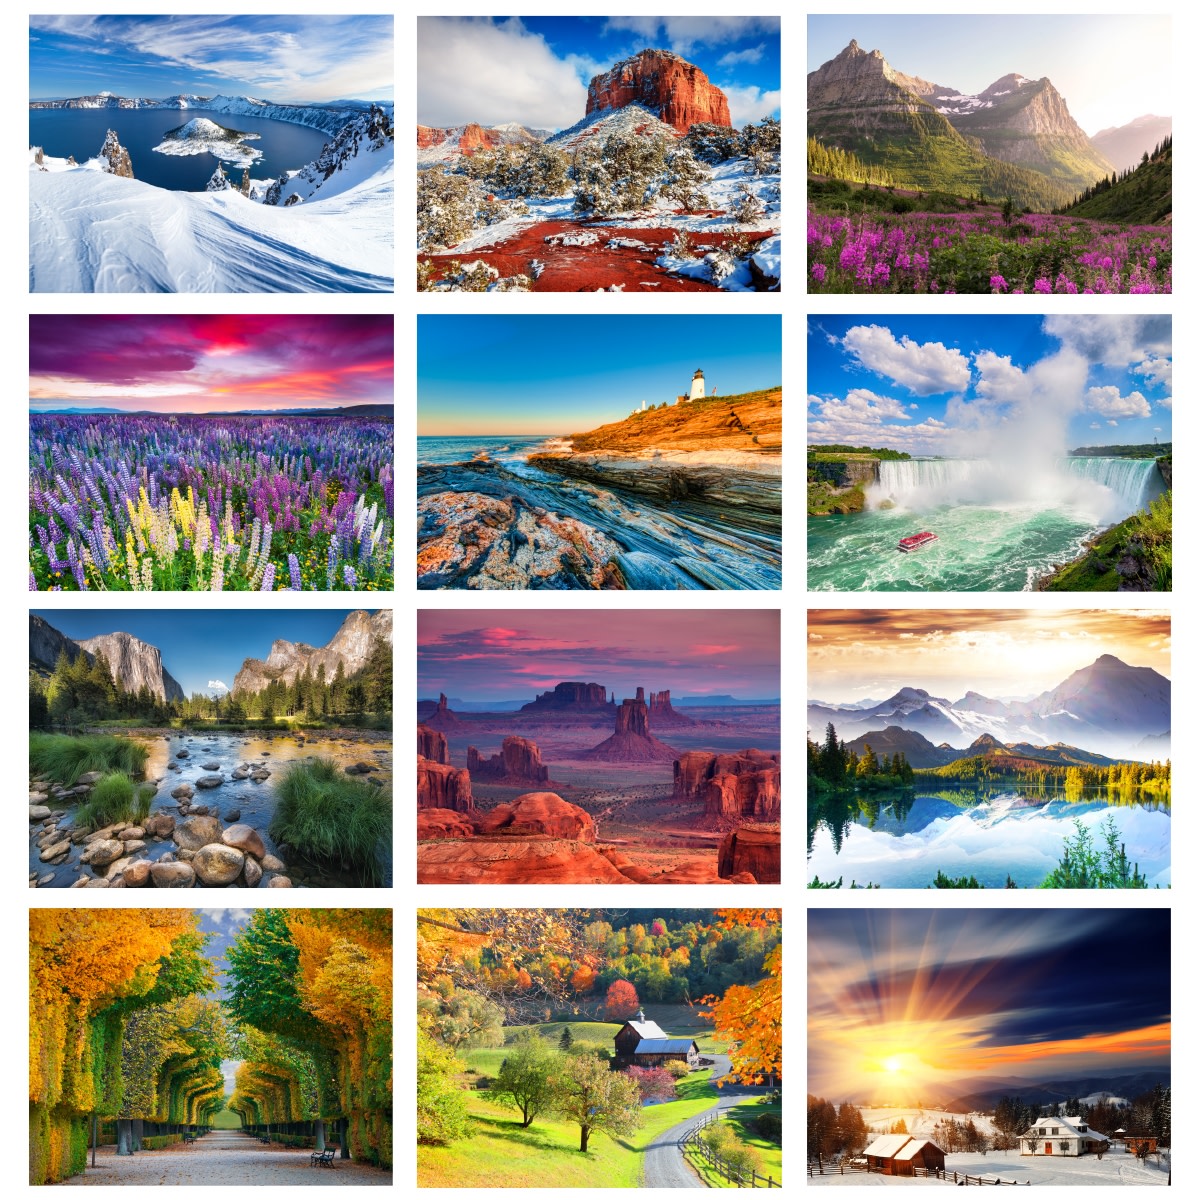 Trusted Choice ® Scenic Wall Calendar Mines Press